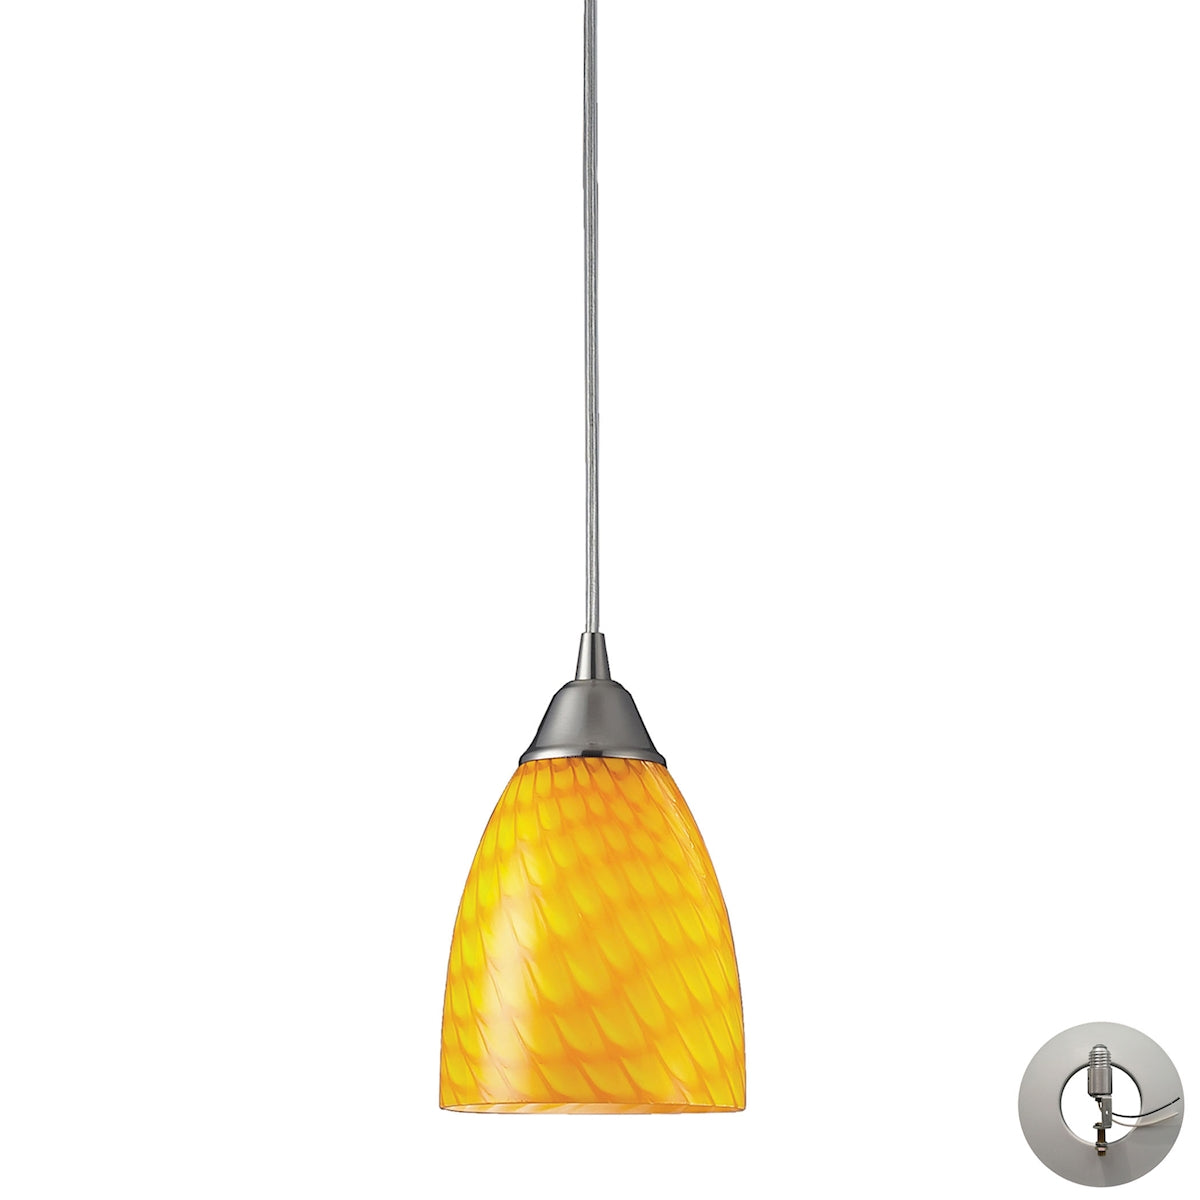 ELK Lighting 416-1CN-LA Arco Baleno 1-Light Mini Pendant in Satin Nickel with Canary Glass - Includes Adapter Kit